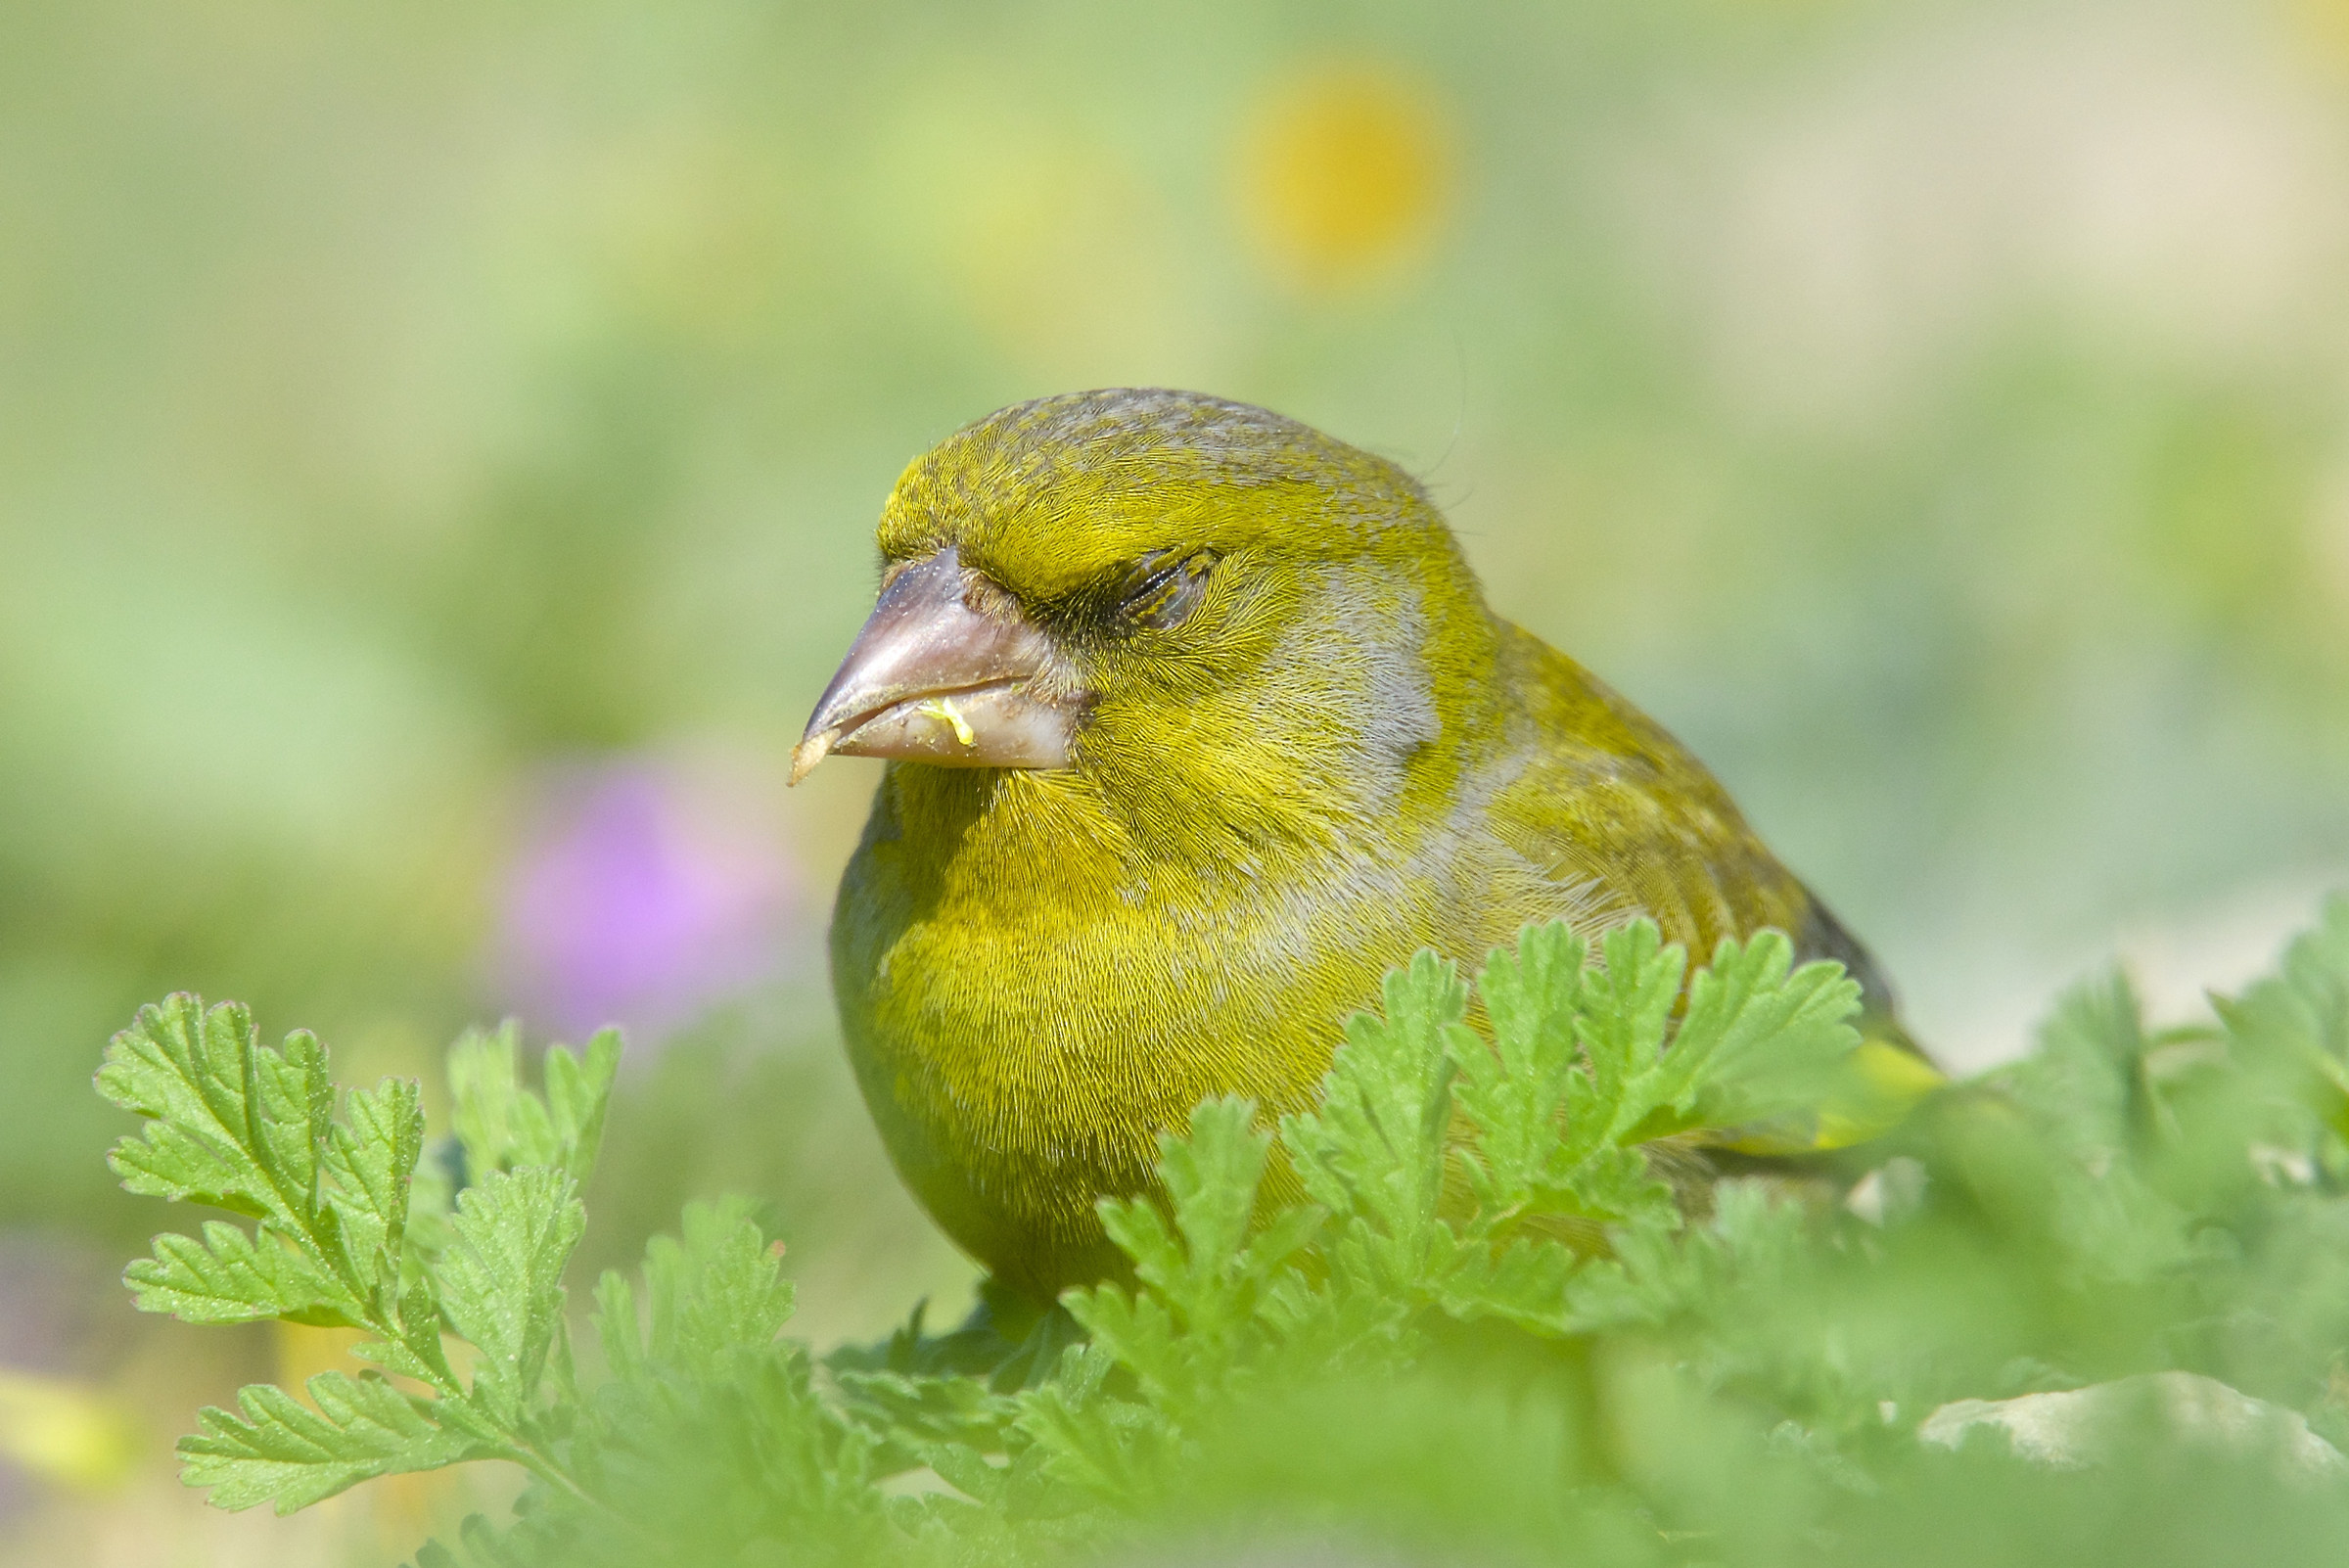 The nap of the greenfinch...